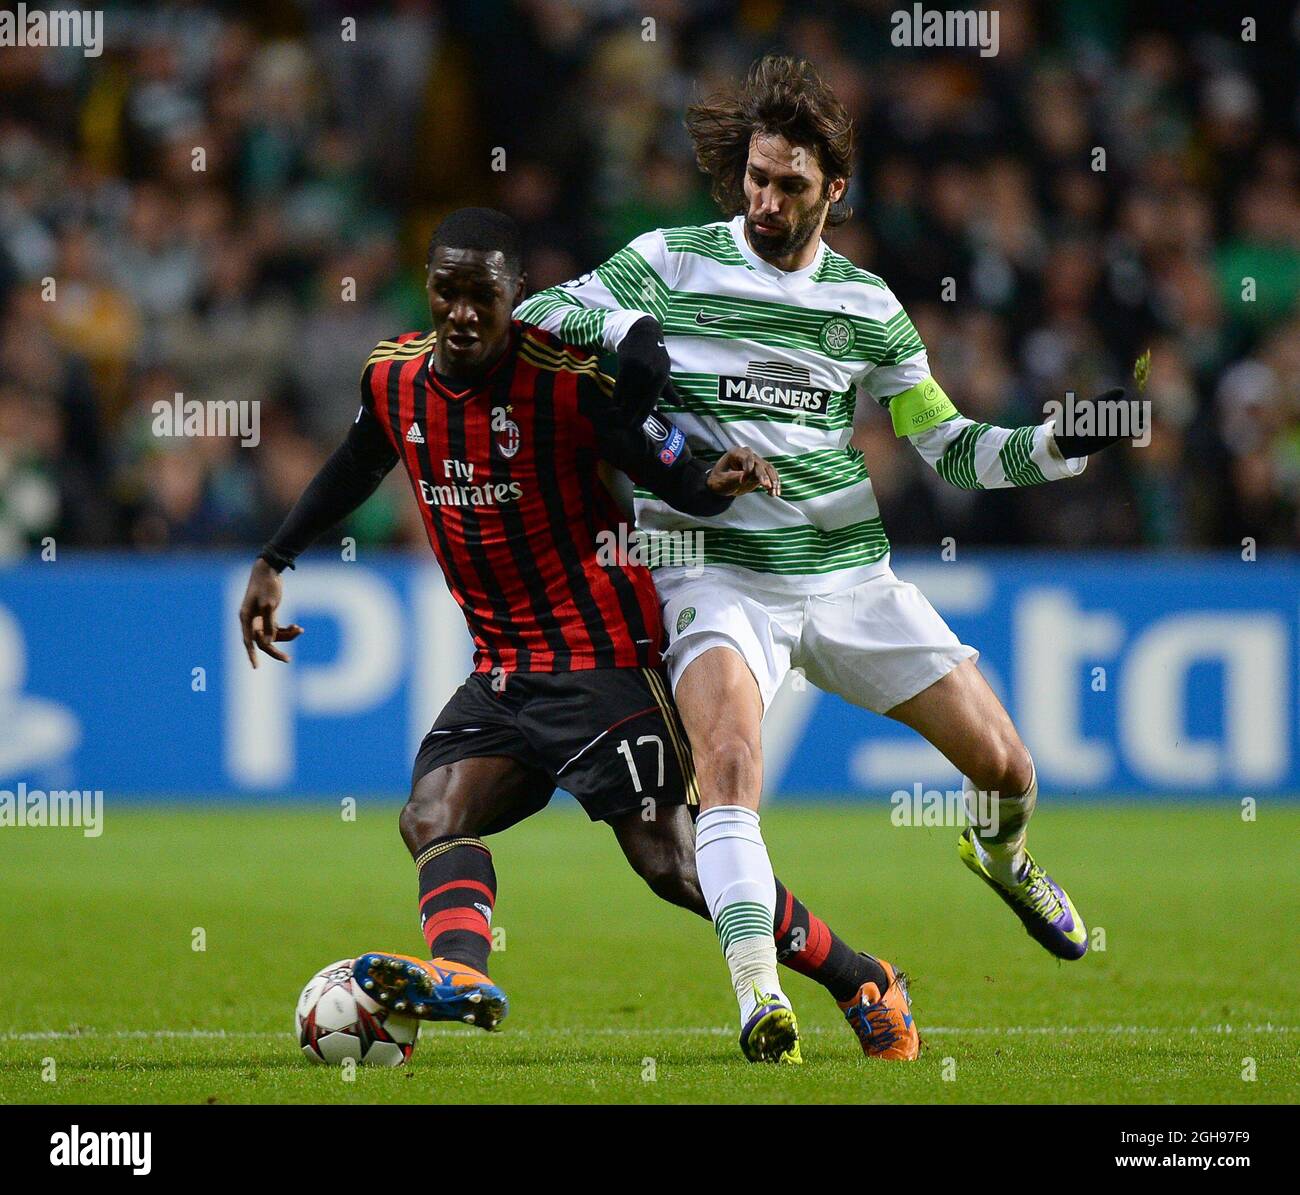 Cristian Zapata of AC Milan in action with Giorgos Samaras of Celtic during the UEFA Champions League Group H match between Celtic and AC Milan held at Celtic Park in Glasgow, Scotland on Nov. 26, 2013. Stock Photo